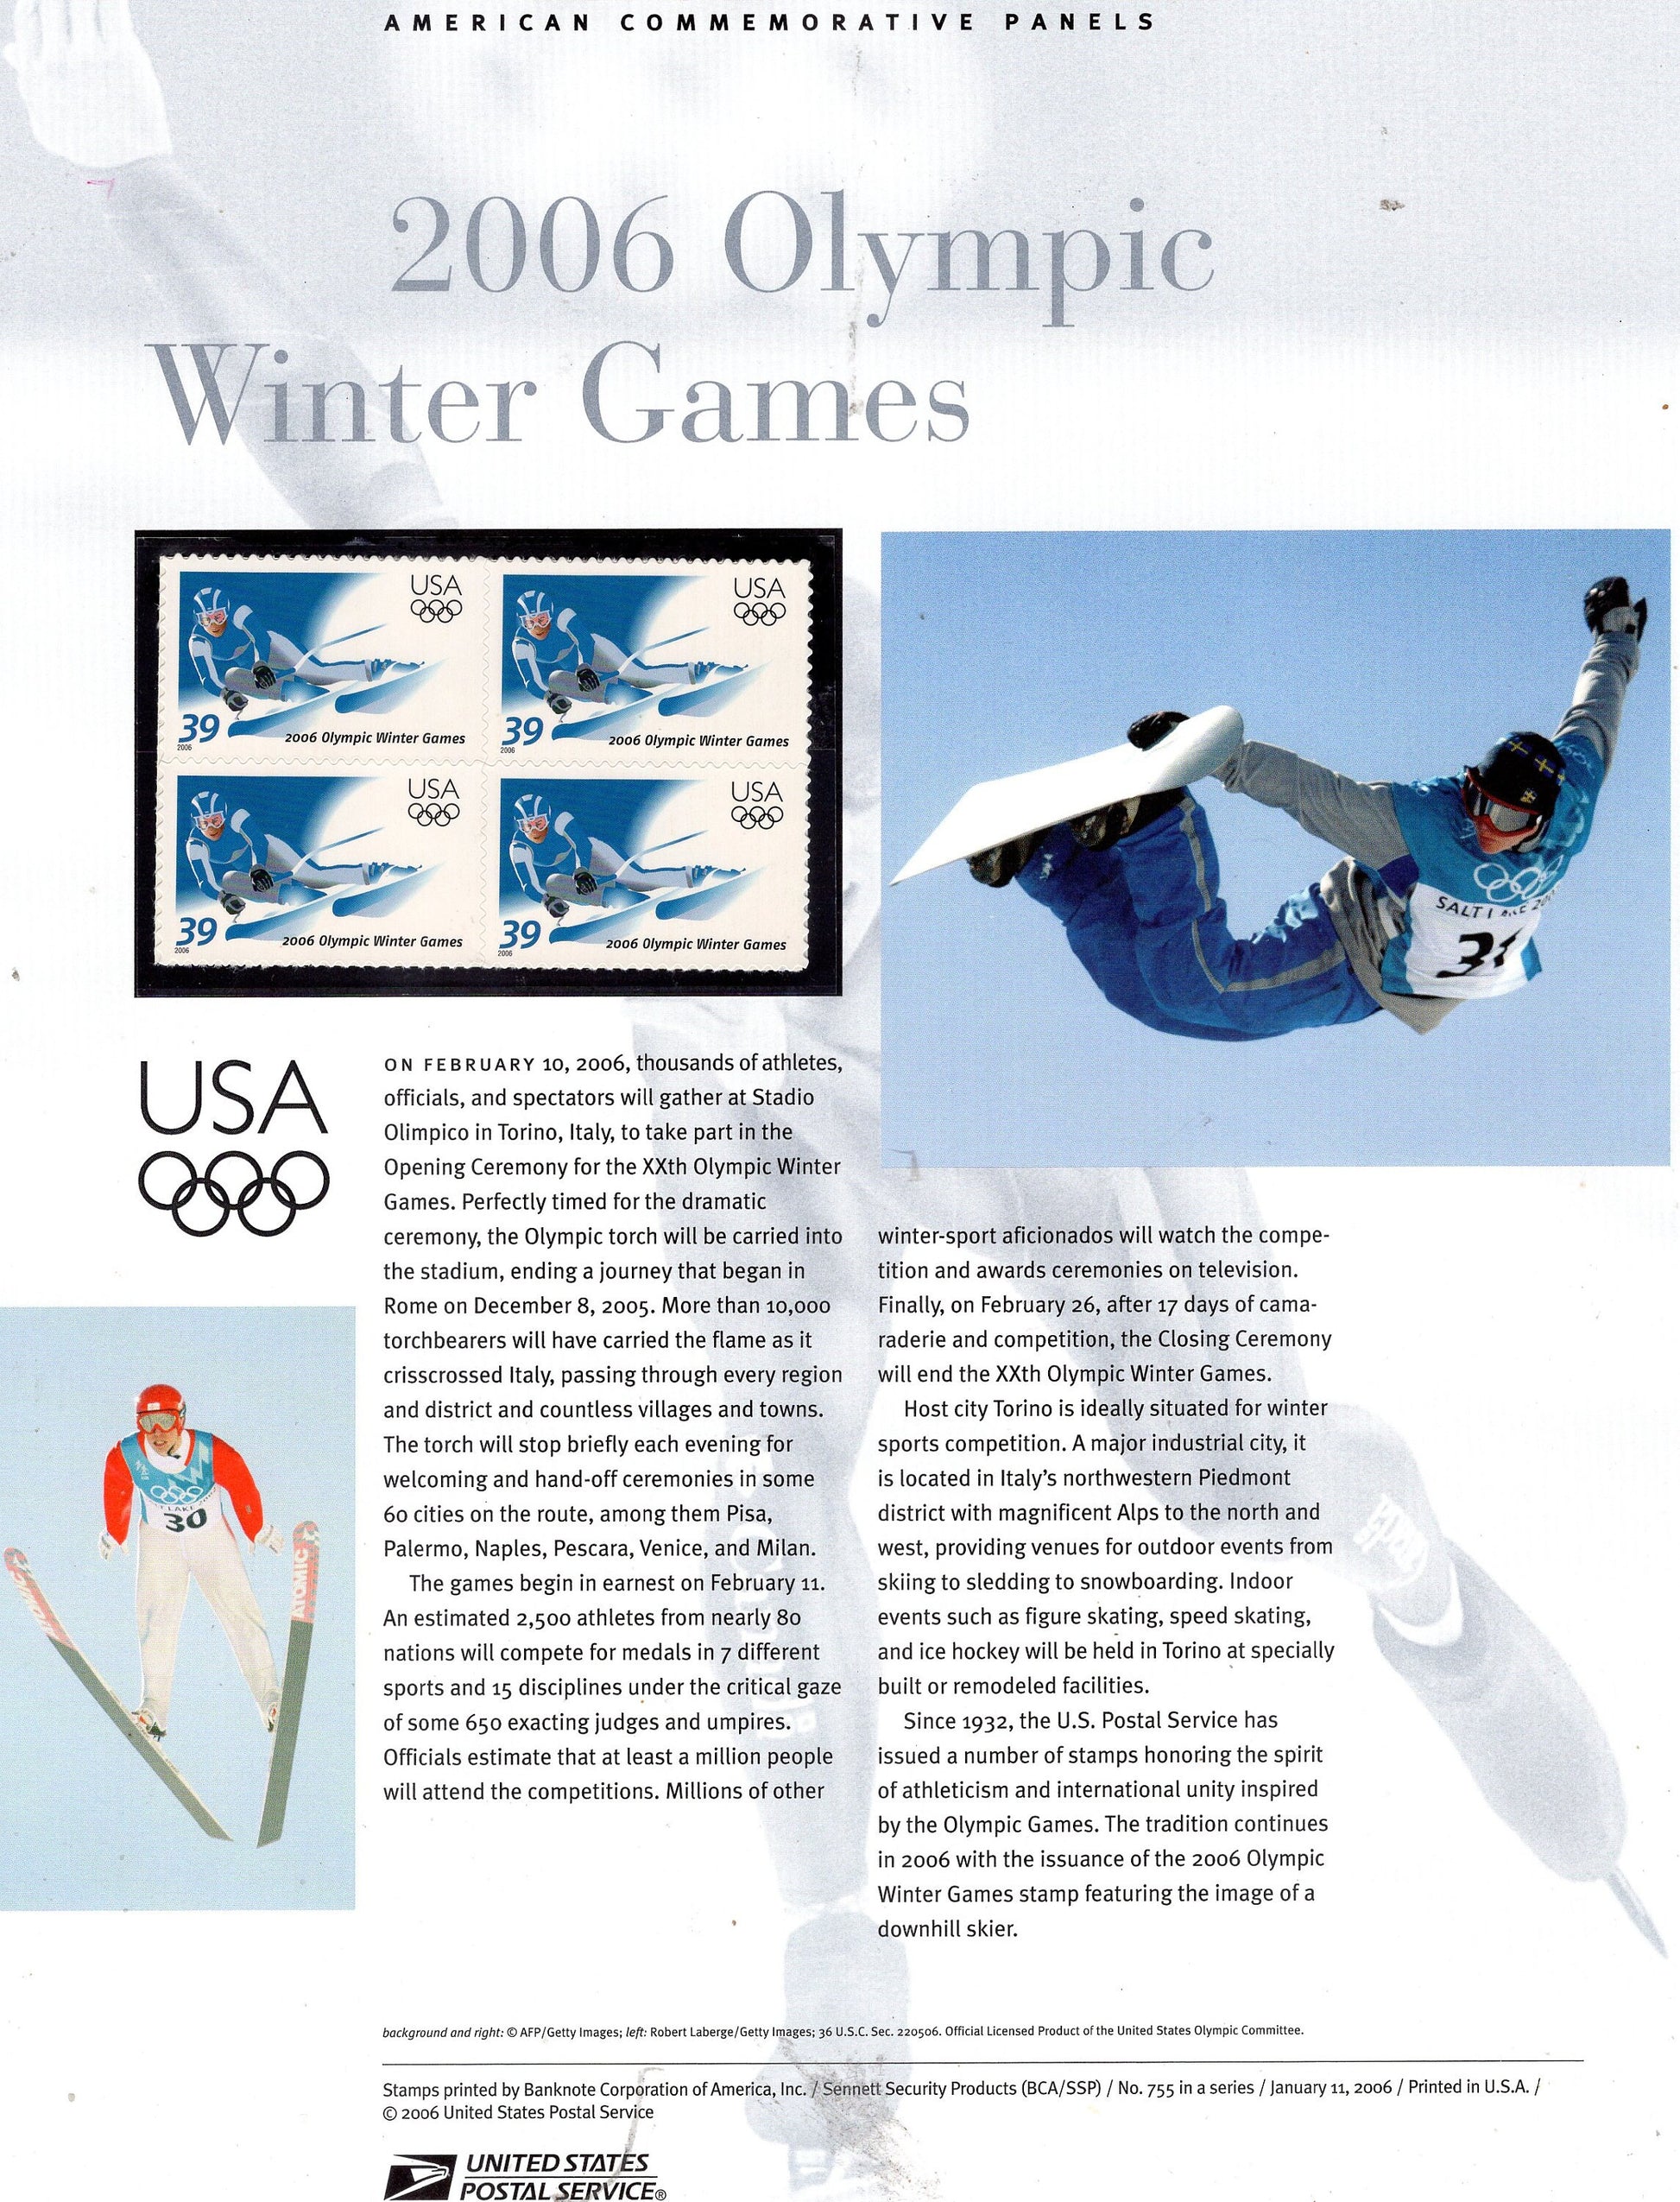 WINTER OLYMPICS SKI Boarding Commemorative Panel with a Block of 4 Stamps Illustrations plus Text – A Great Gift 8.5x11 - Issued in 2006 #755 -